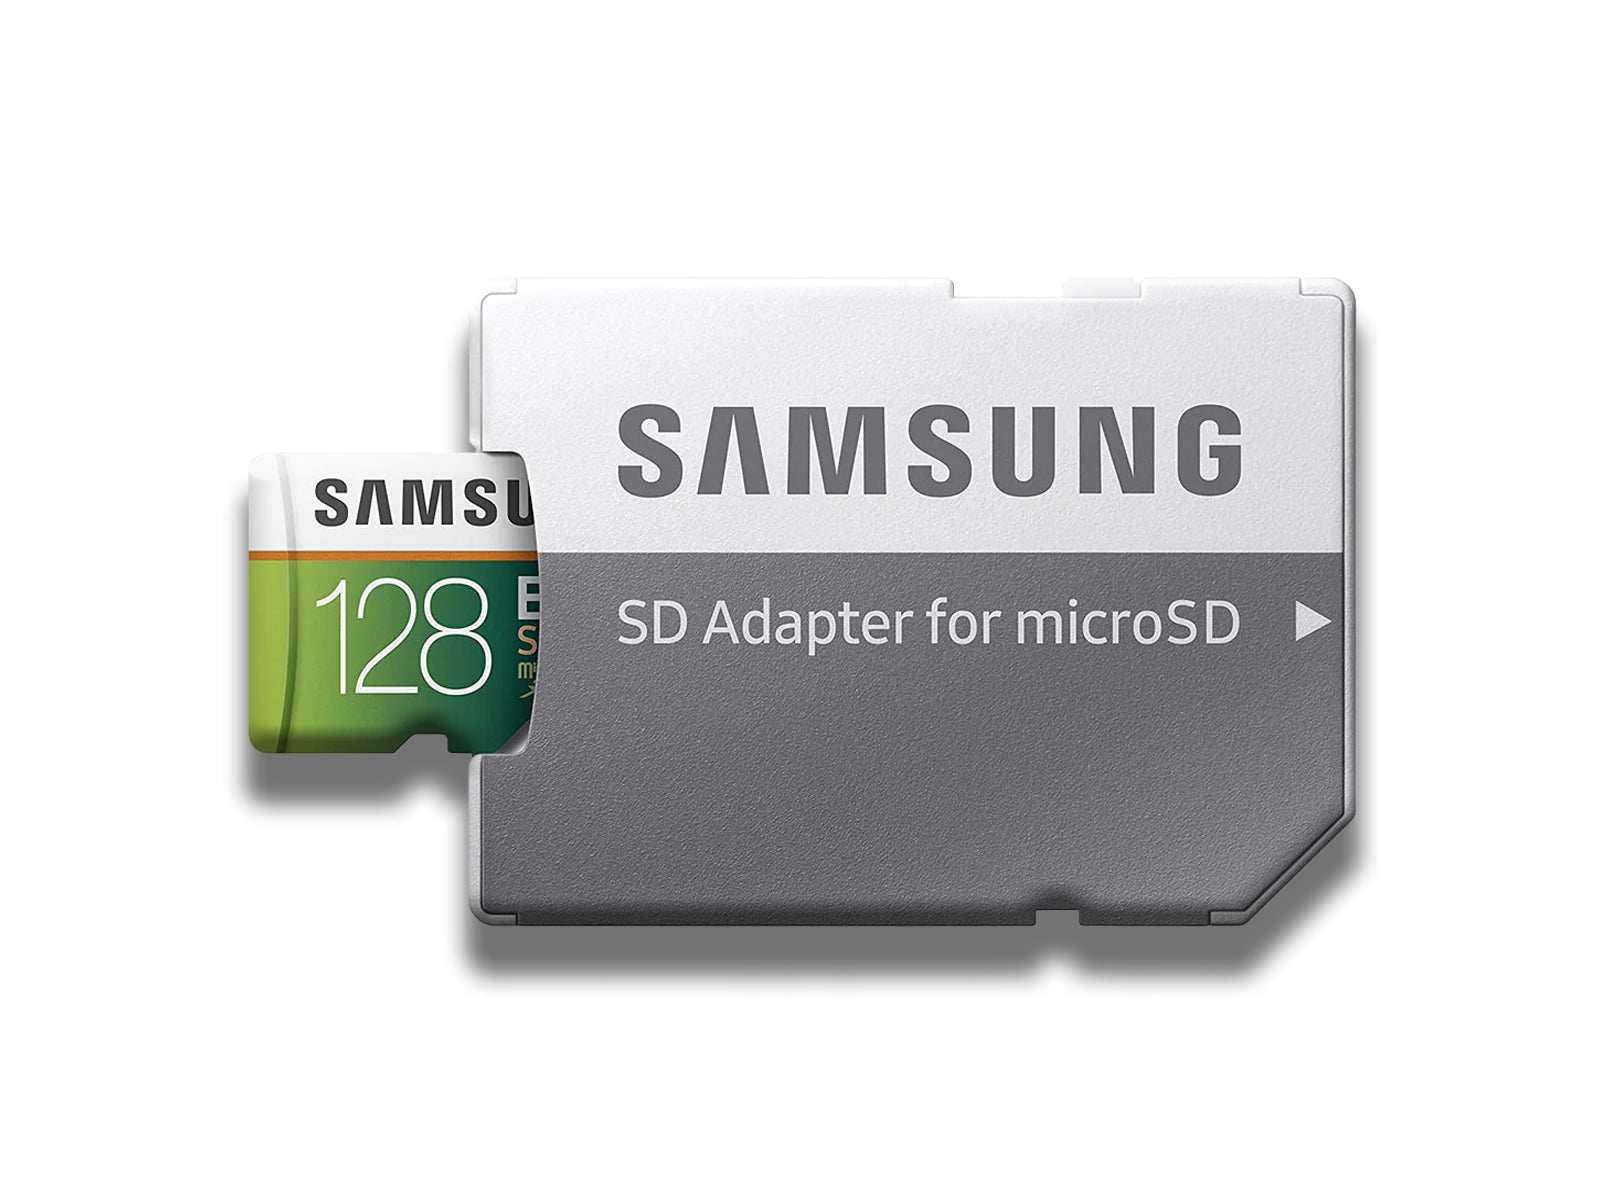 MicroSD 128GB 100MB/s Full HD & 4K UHD Memory Card with SD Adapter | MB-ME128H (Samsung®)